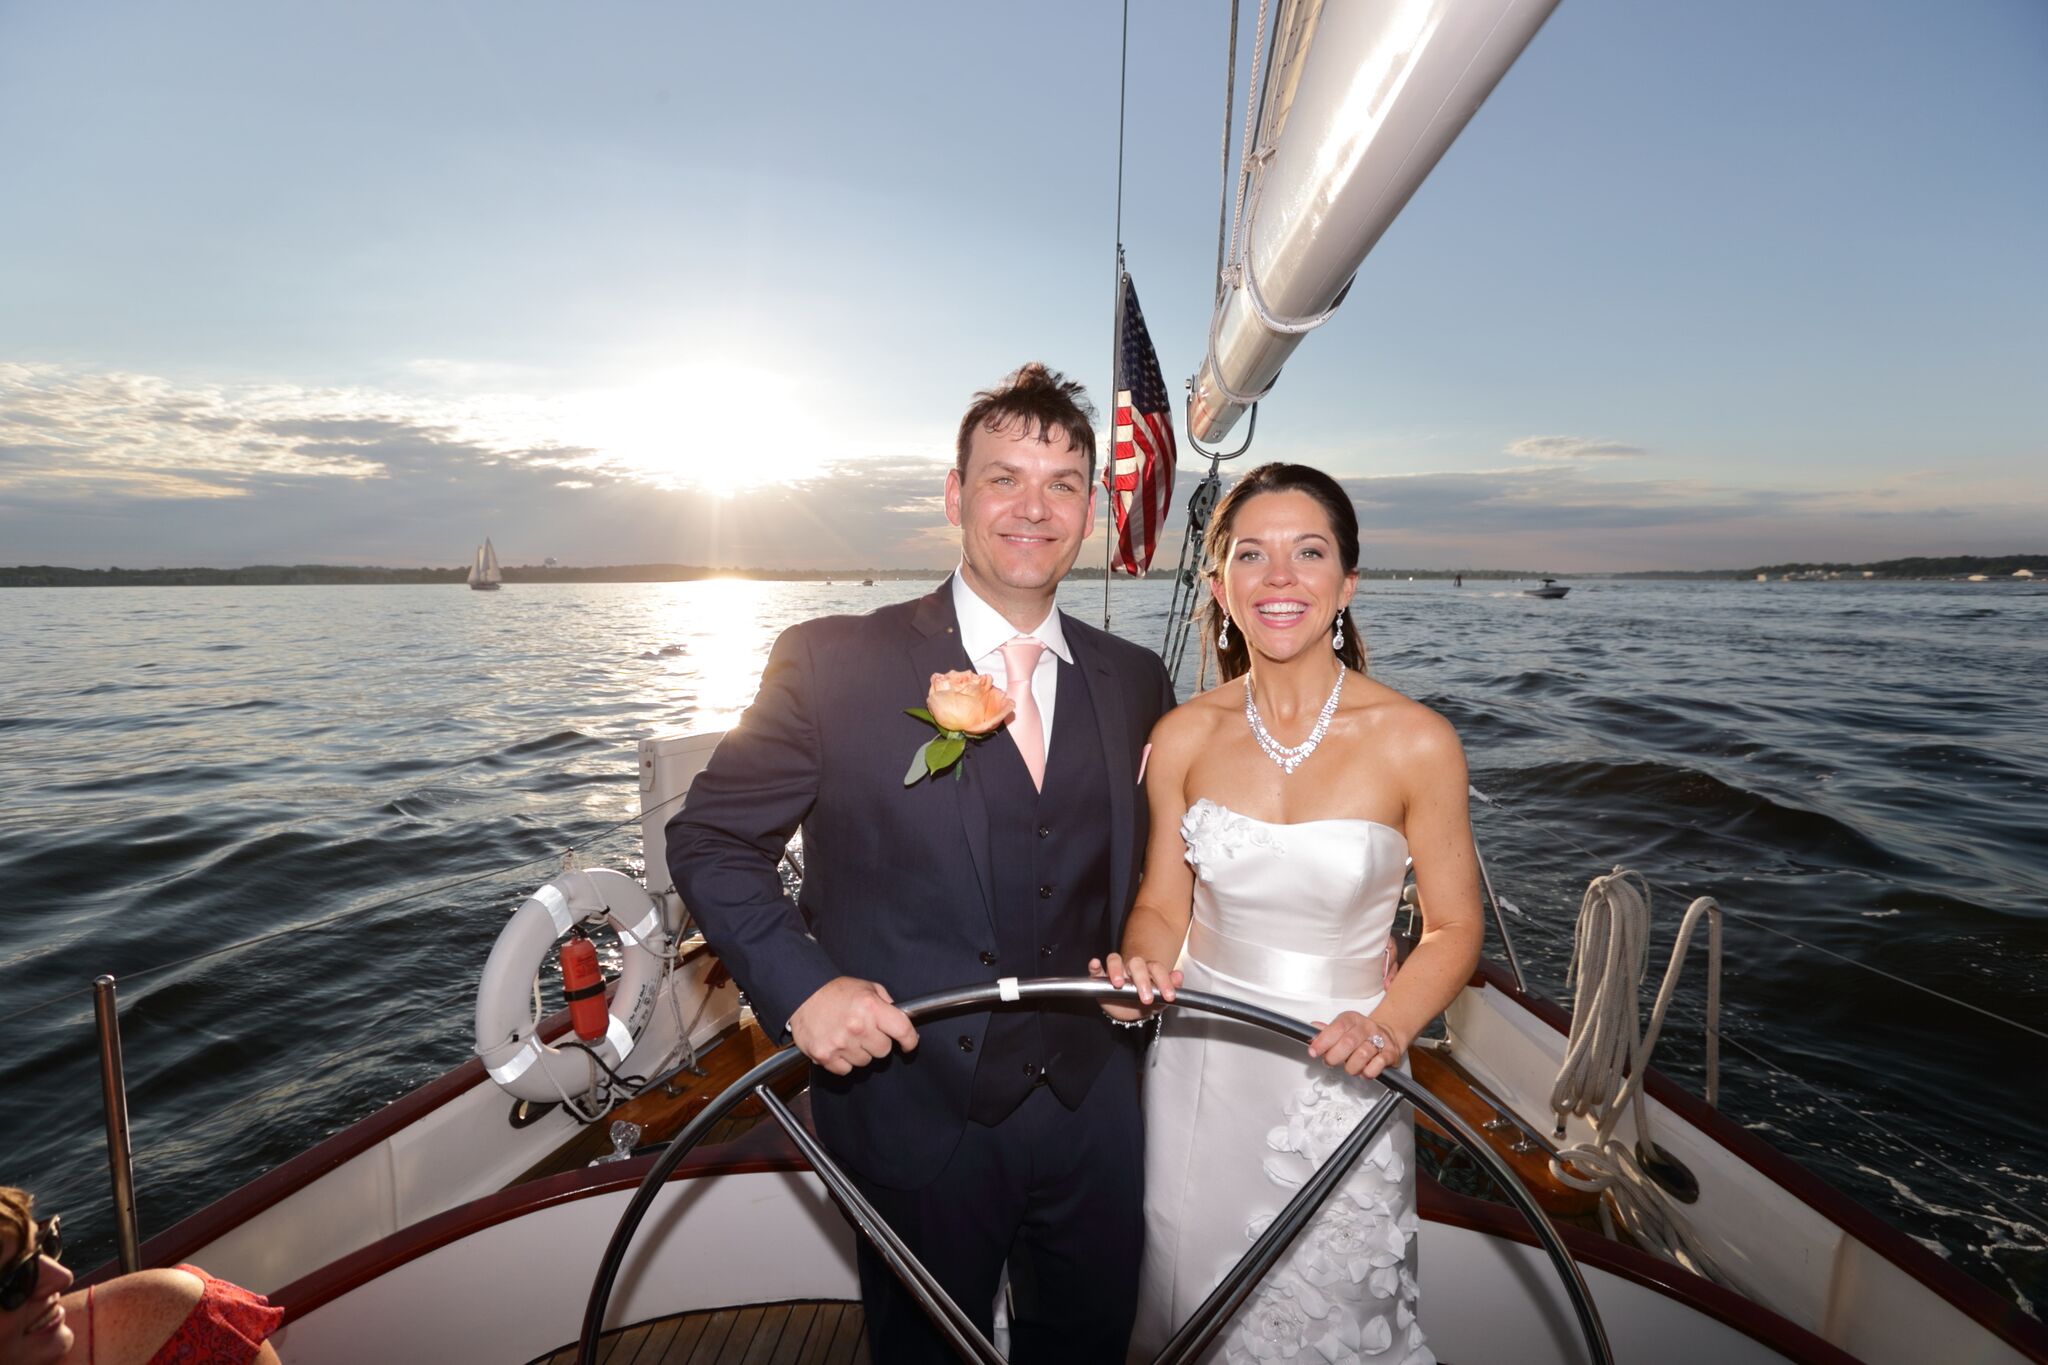 Bride and Groom steering the boat together with sunset behind them